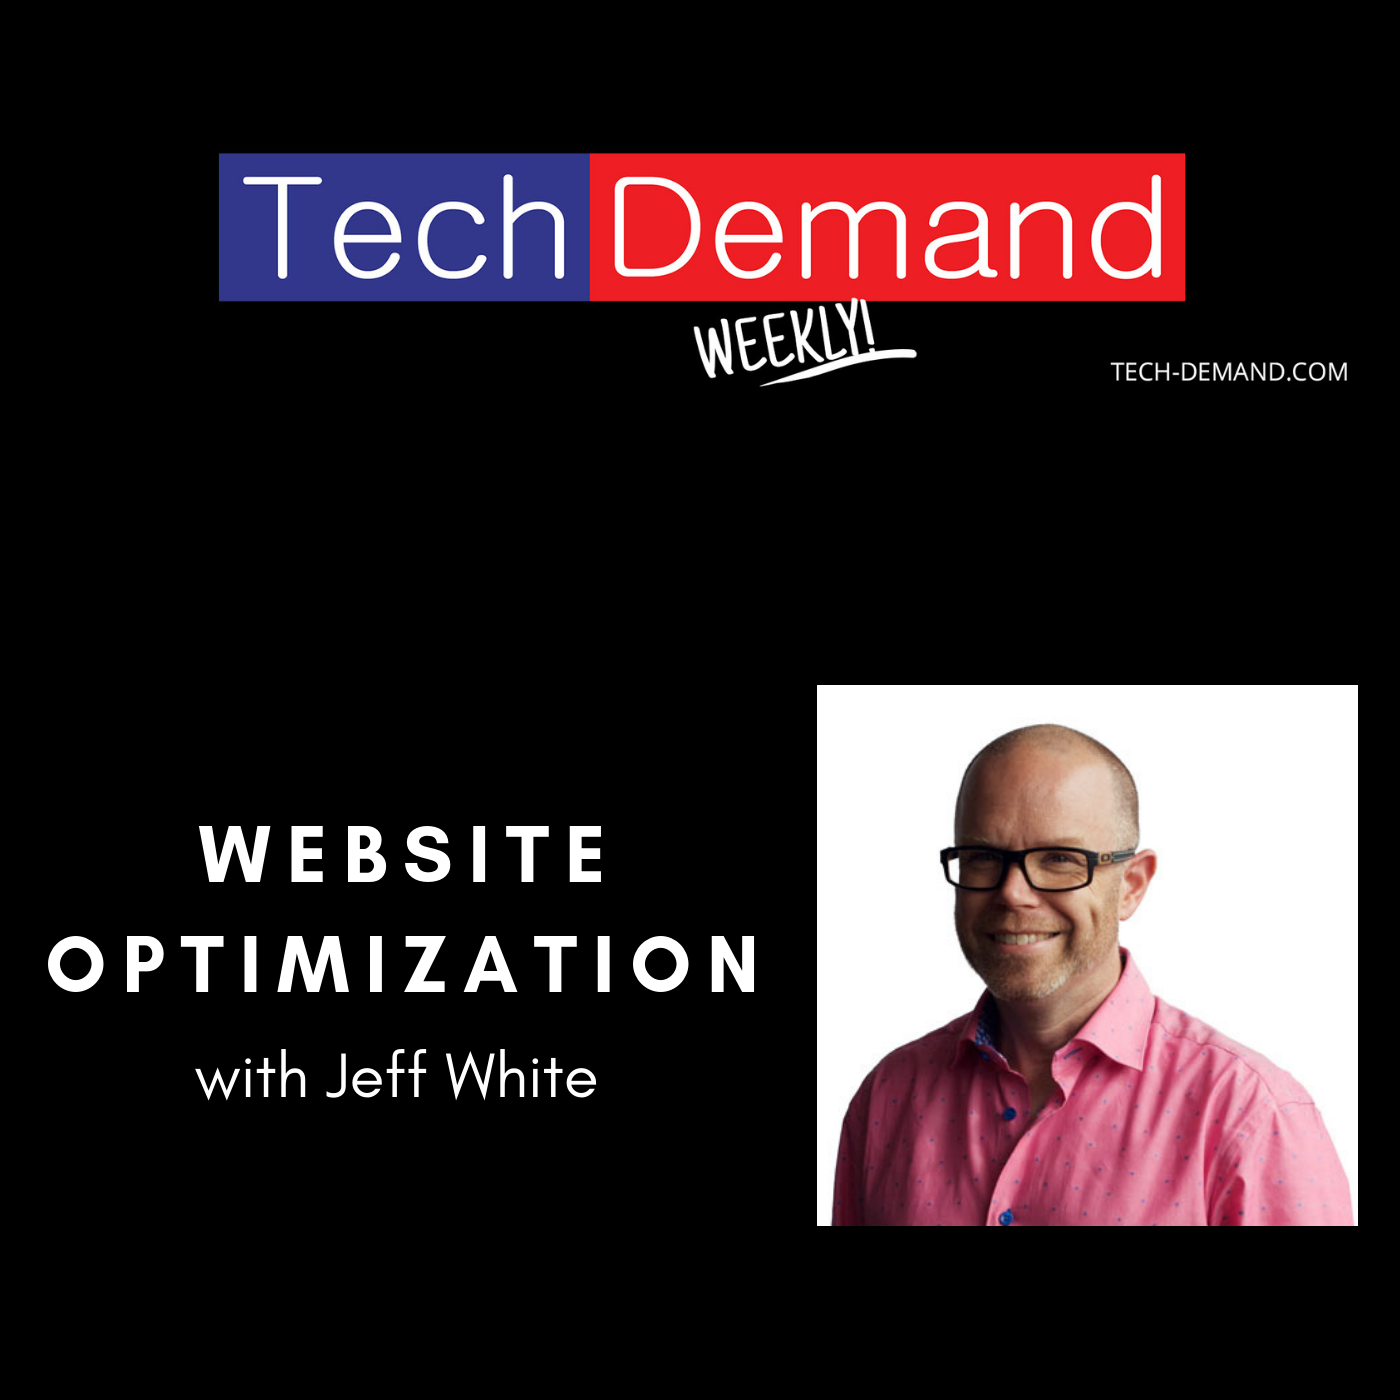 Episode artwork with Tech Demand logo, episode title and headshot image of guest, Jeff White